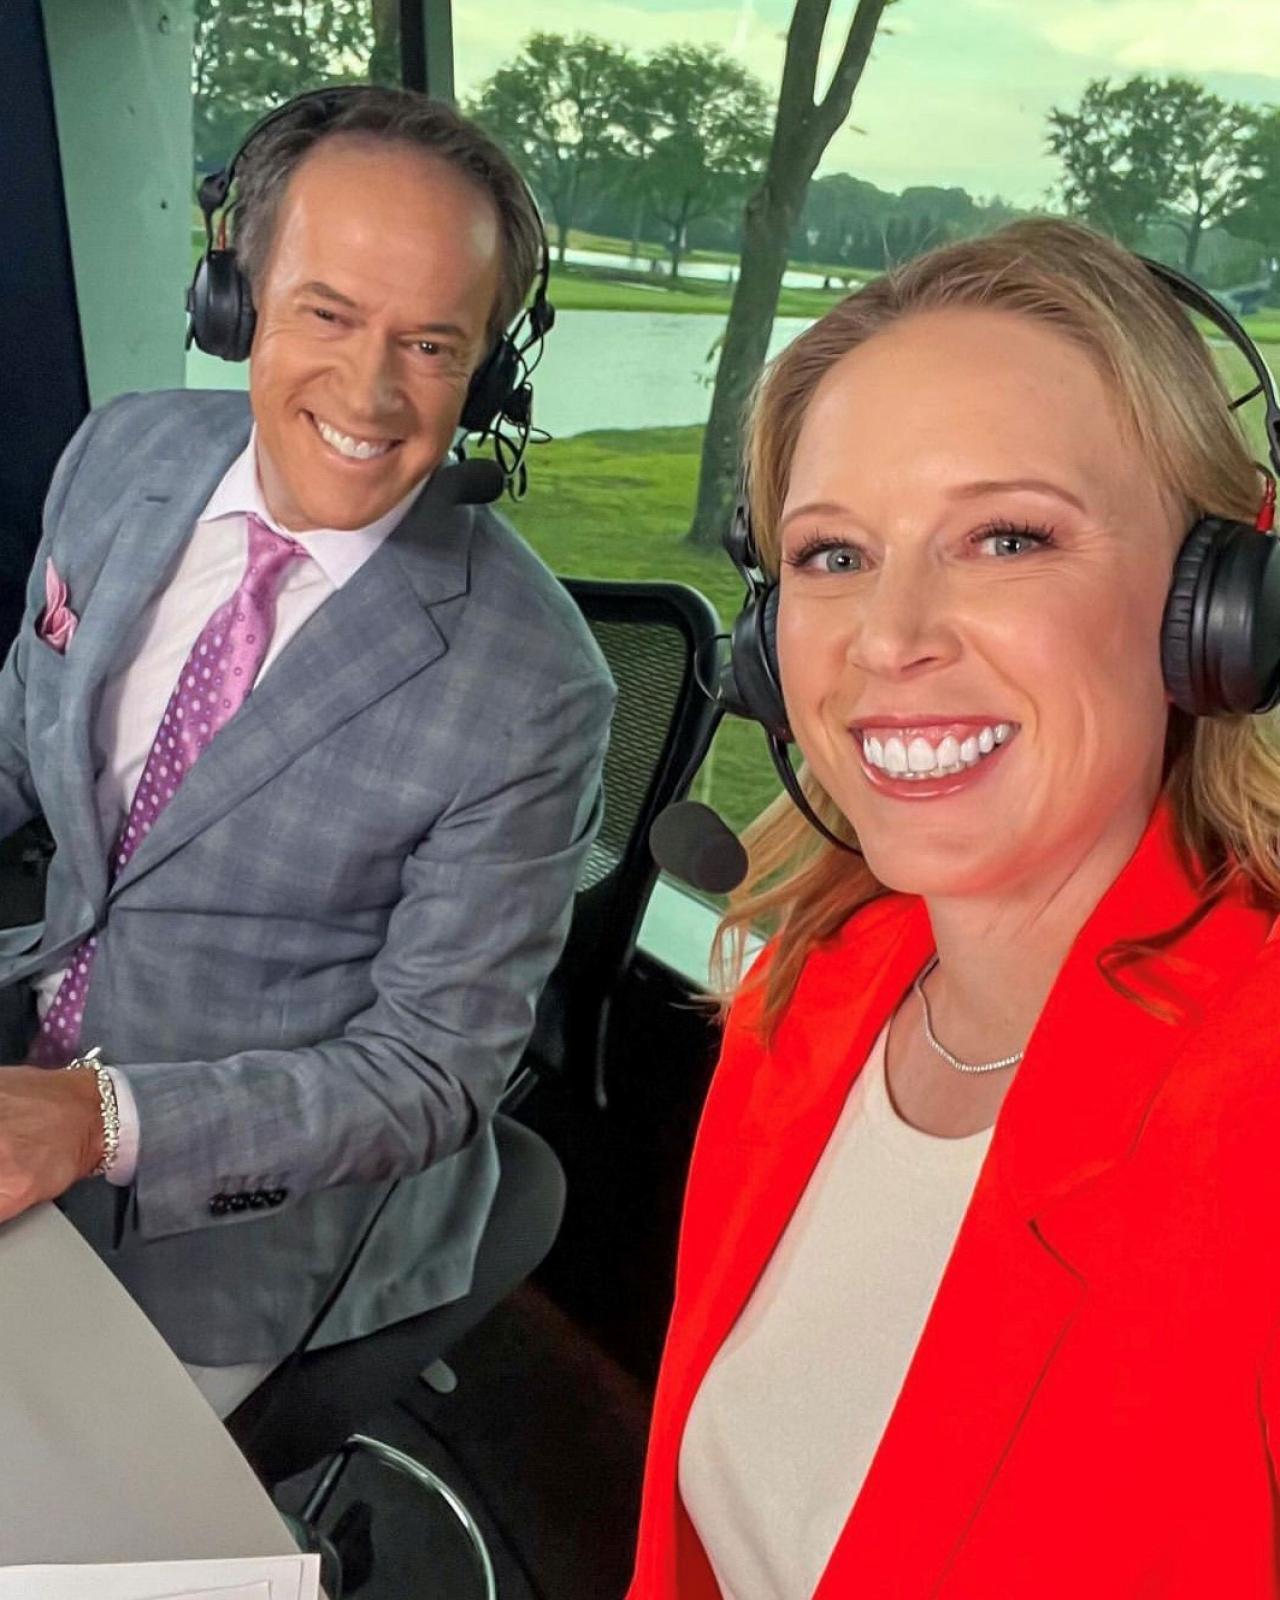 Solheim Cup TV coverage was 'frustrating,' even NBC analysts agree